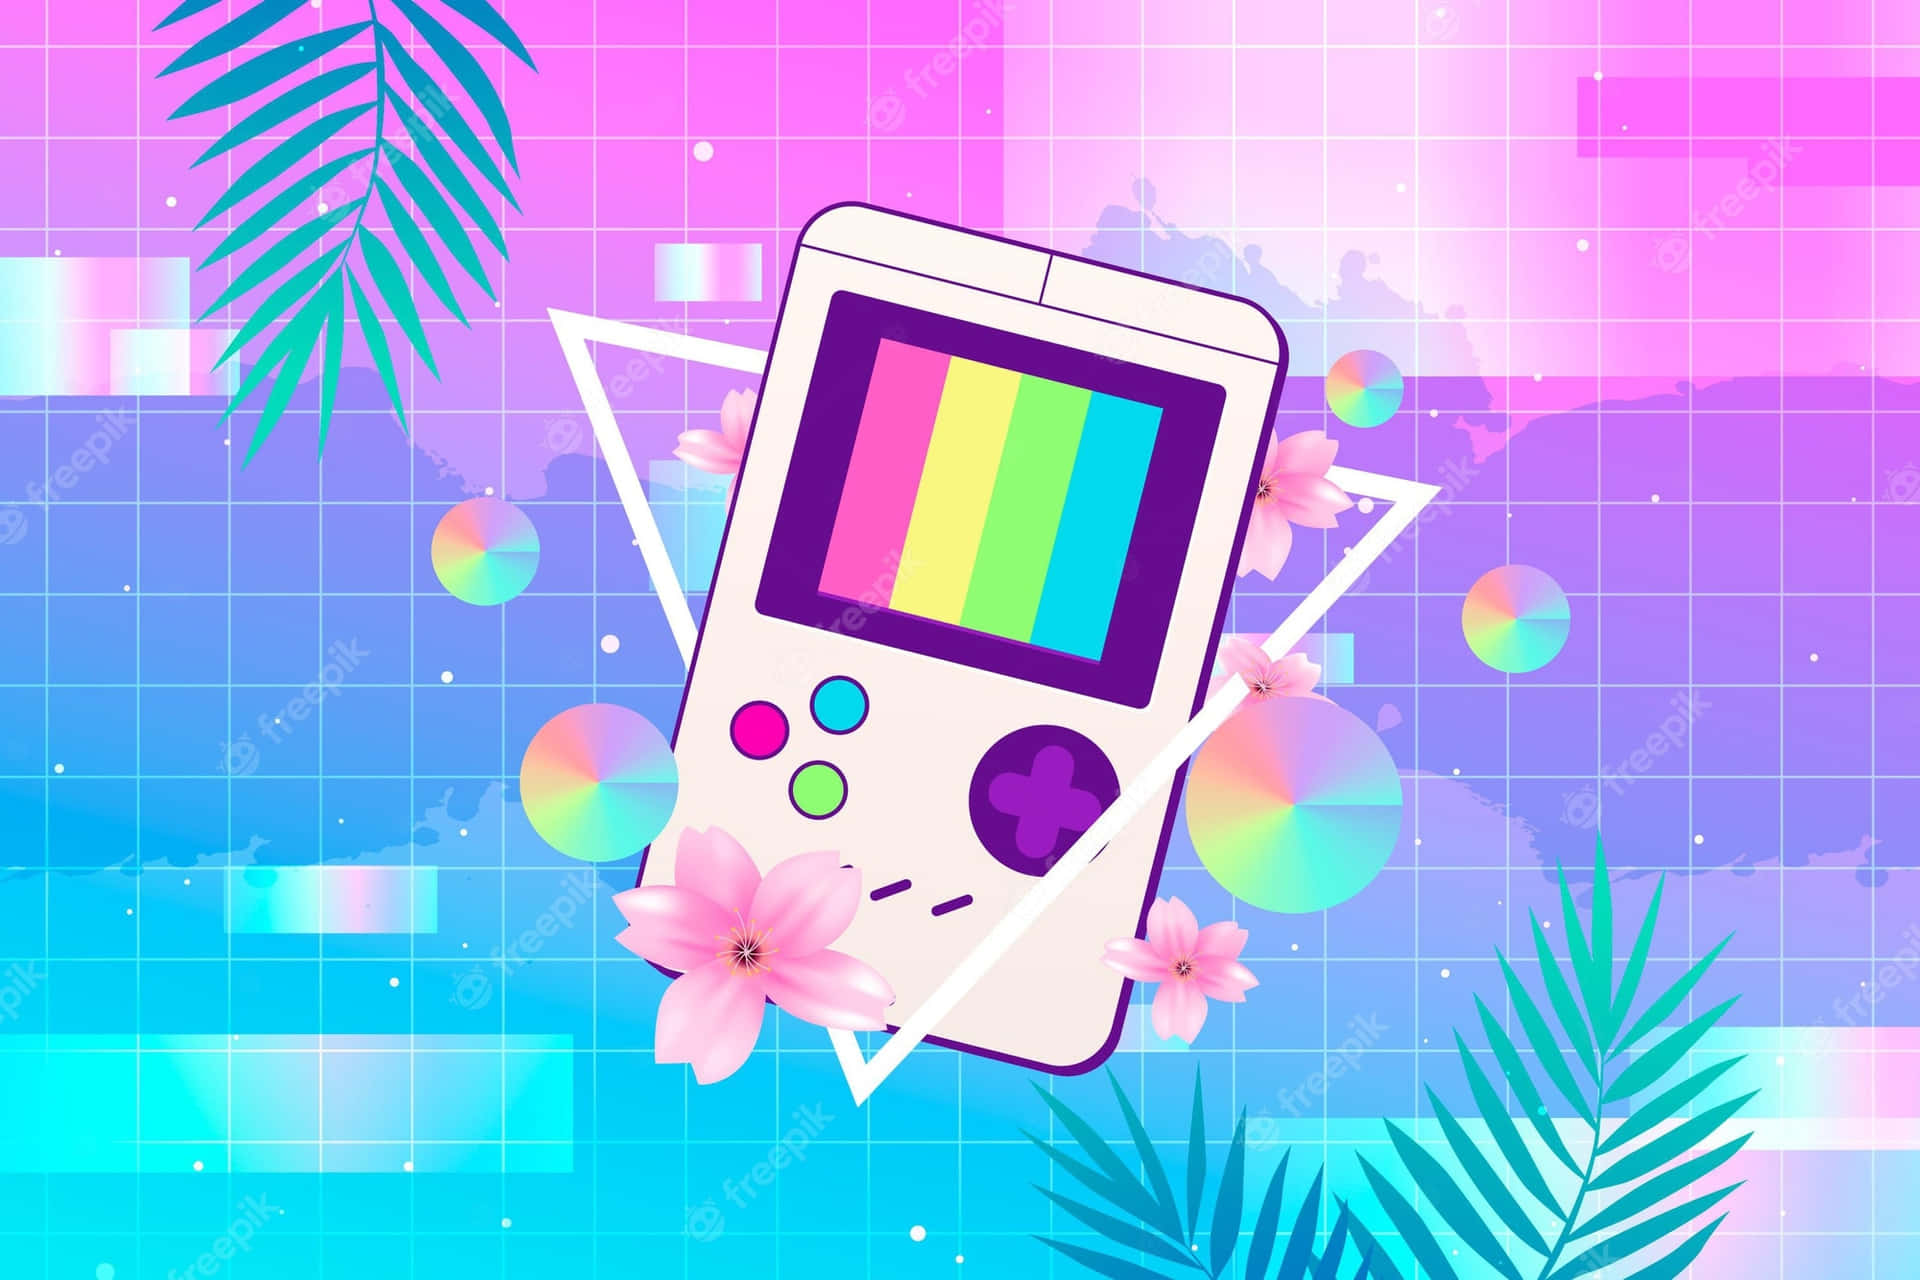 A Retro Gameboy With Flowers And Leaves On A Colorful Background Wallpaper